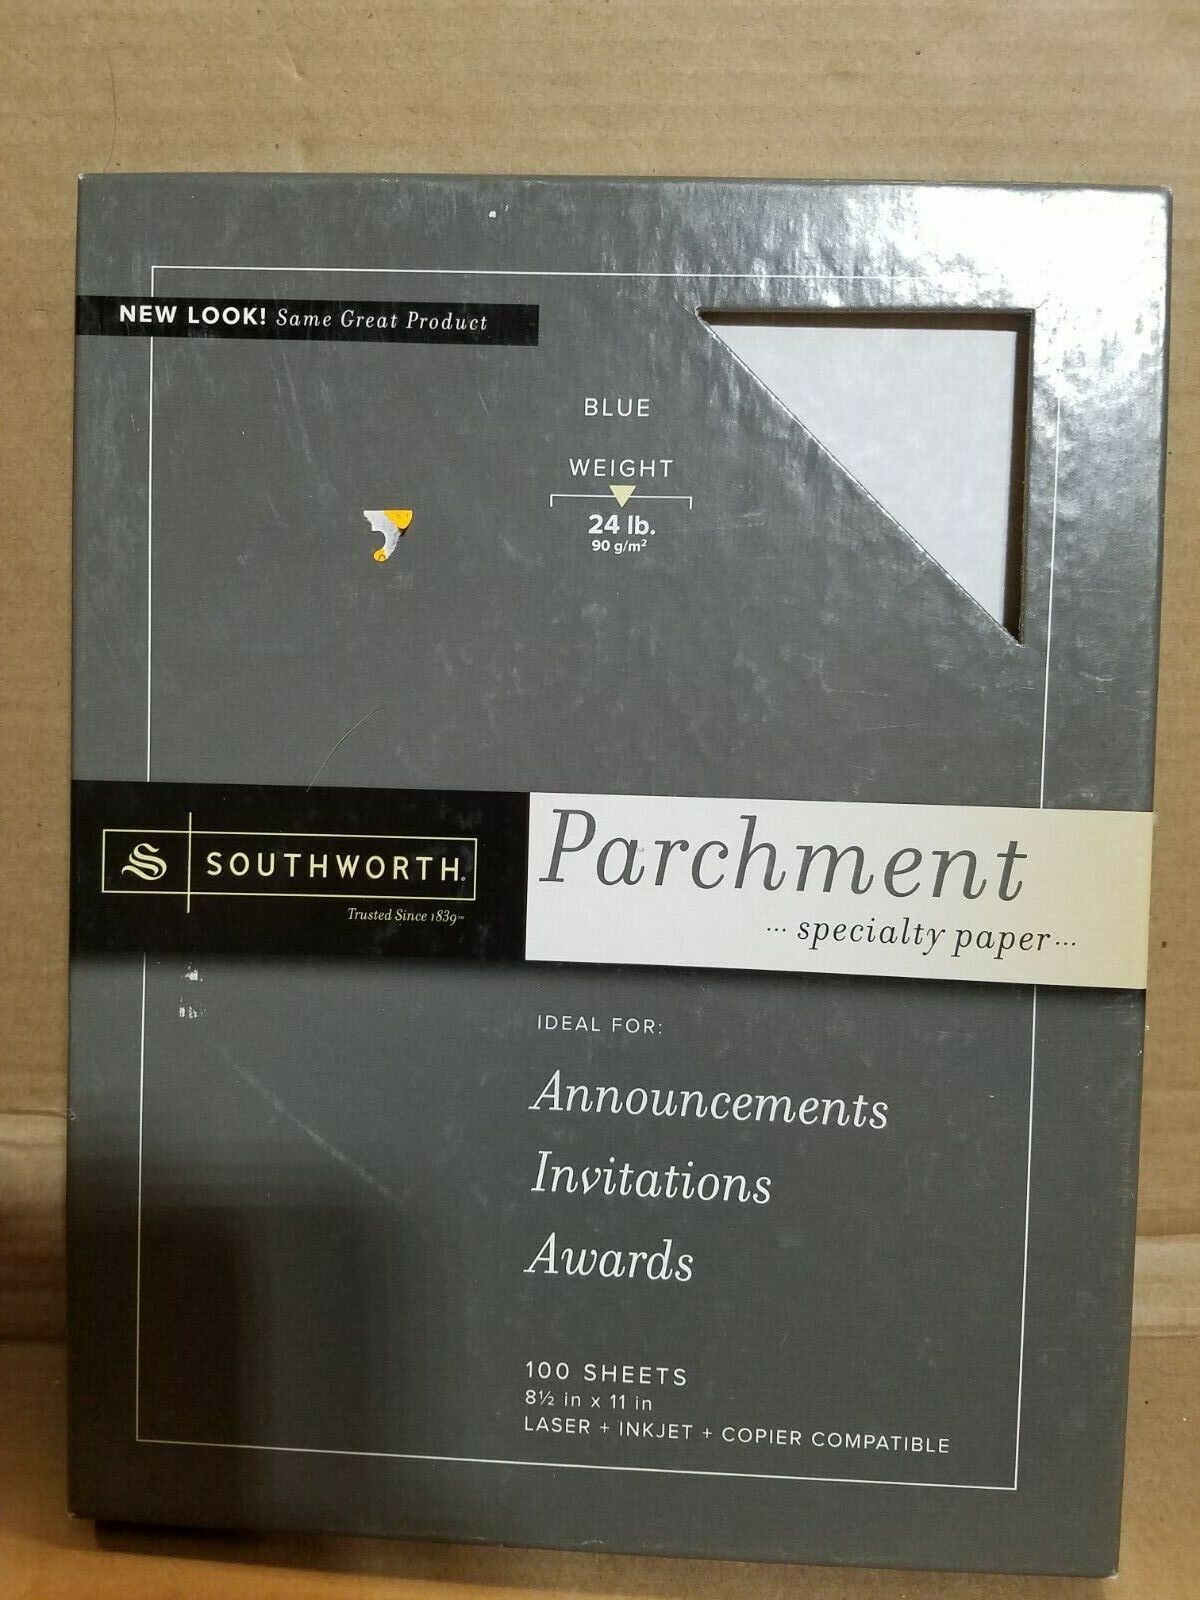 Southworth PARCHMENT Specialty PAPER BLUE 24lb 100 sheets 8.5x11 Laser Ink NEW